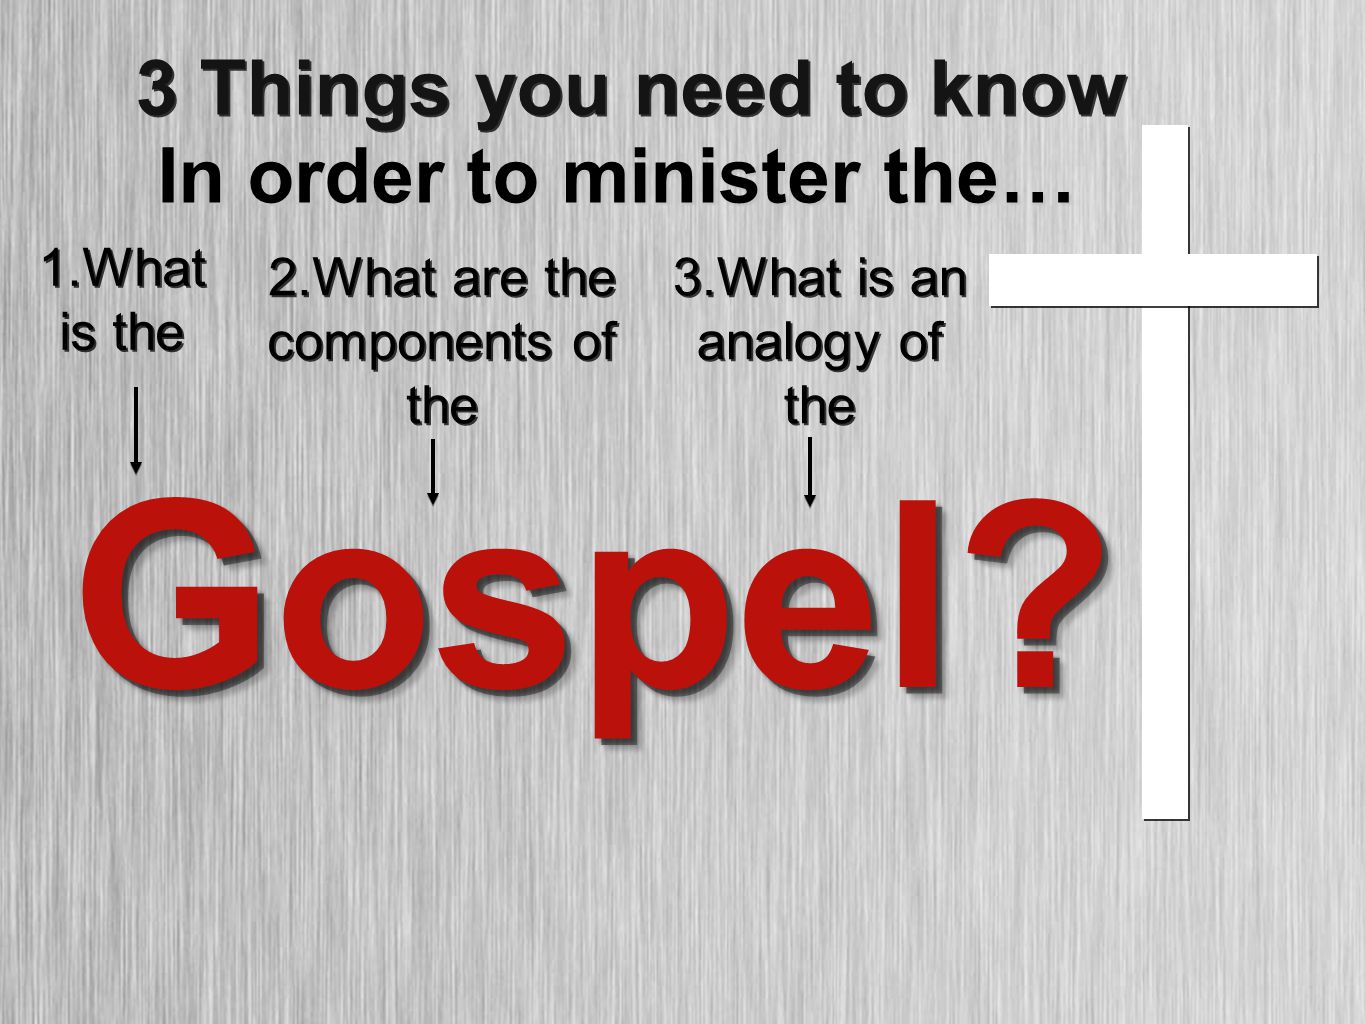 1.What is the 2.What are the components of the 3.What is an analogy of the Gospel Gospel.